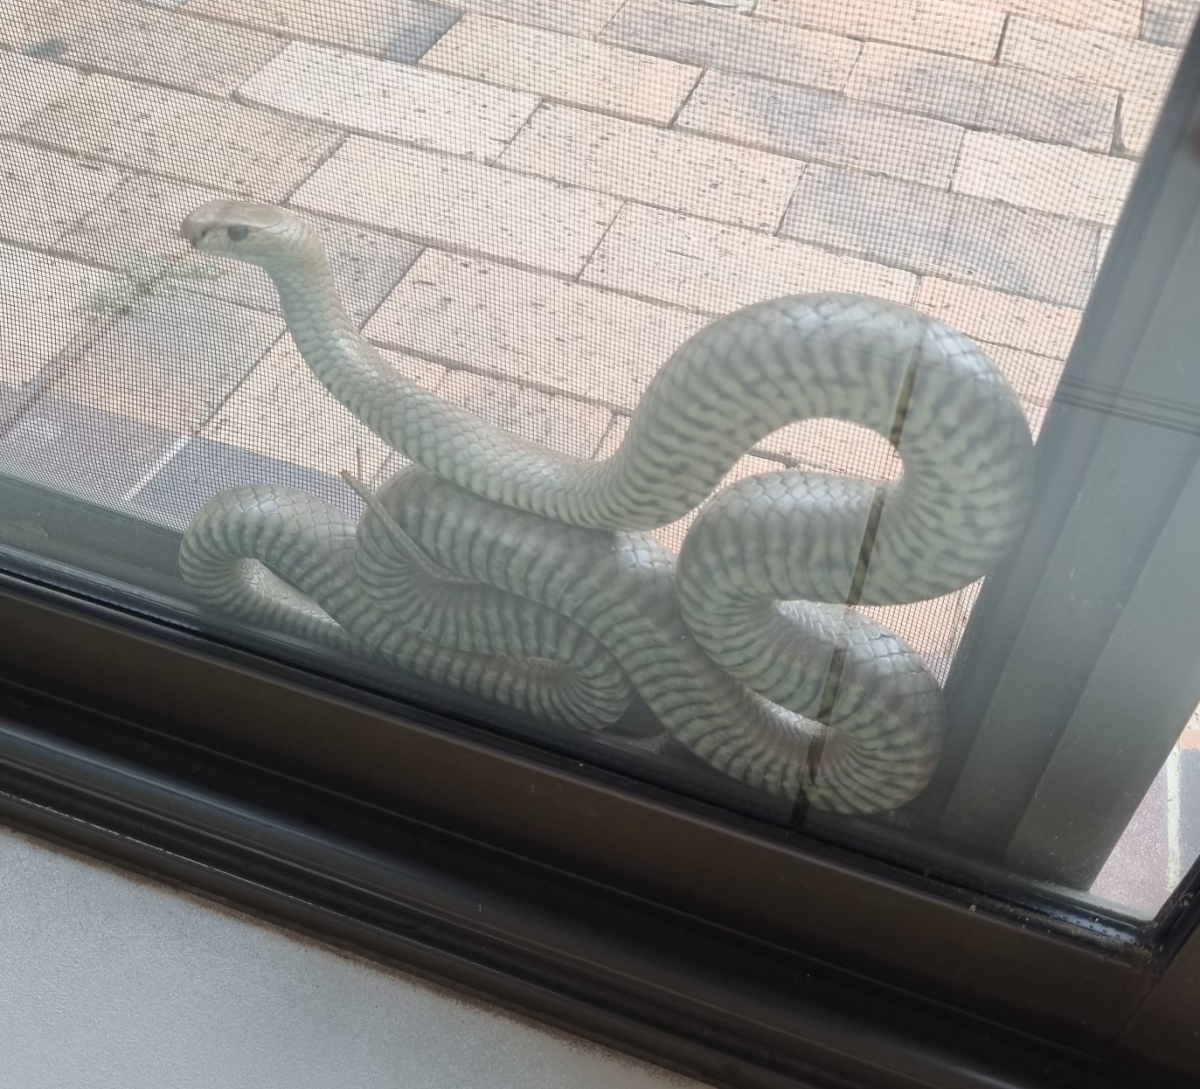 Brown snake coiled up between glass and fly screen doors. 